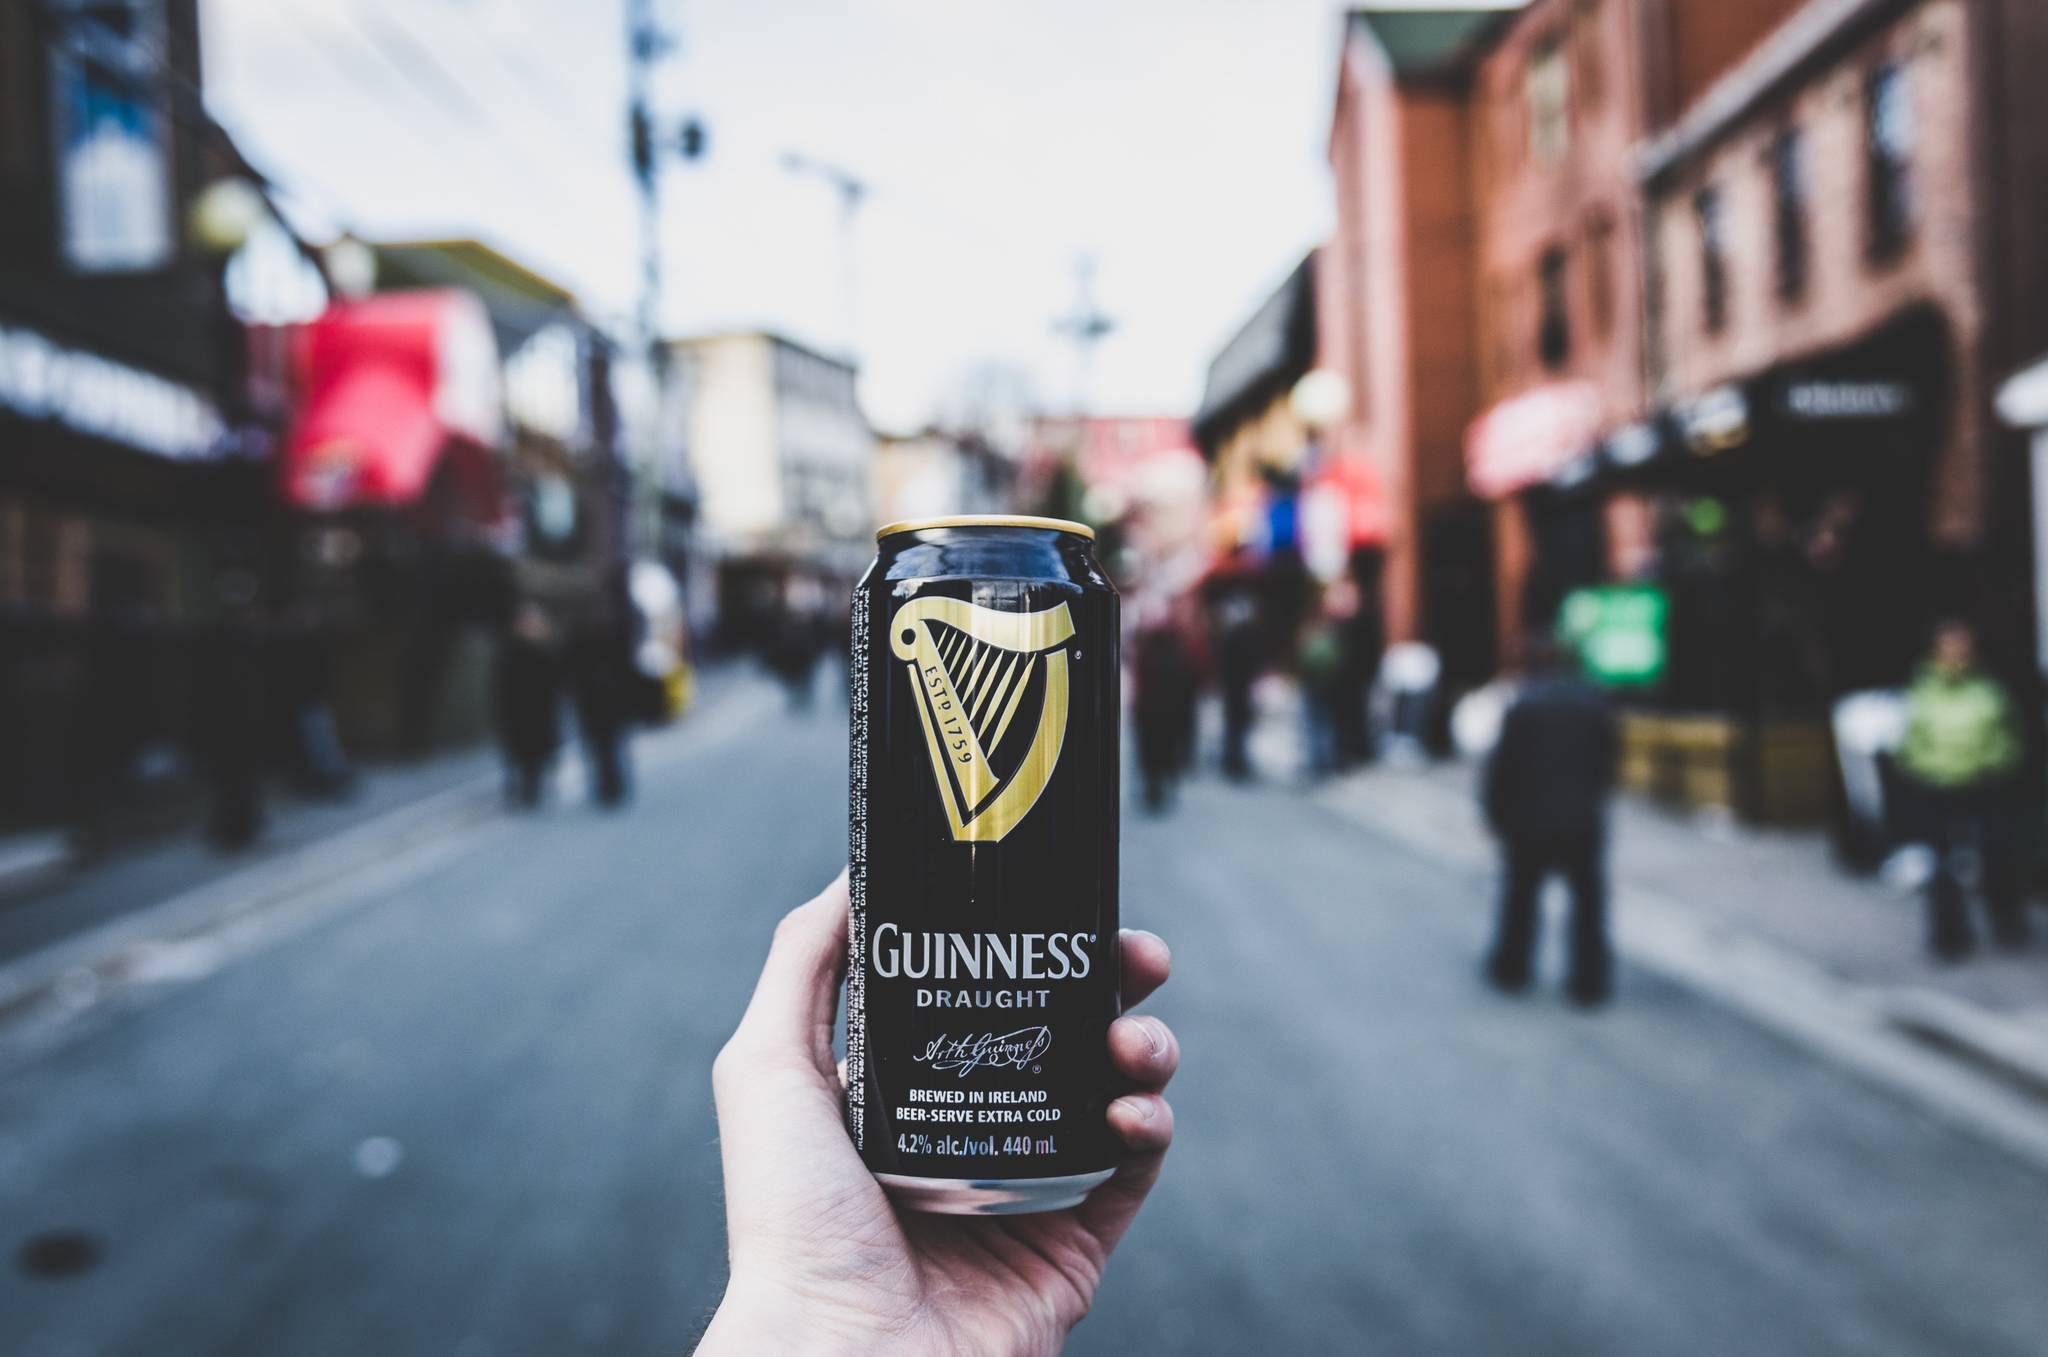 Guinness aims for plastic free to please eco-drinkers